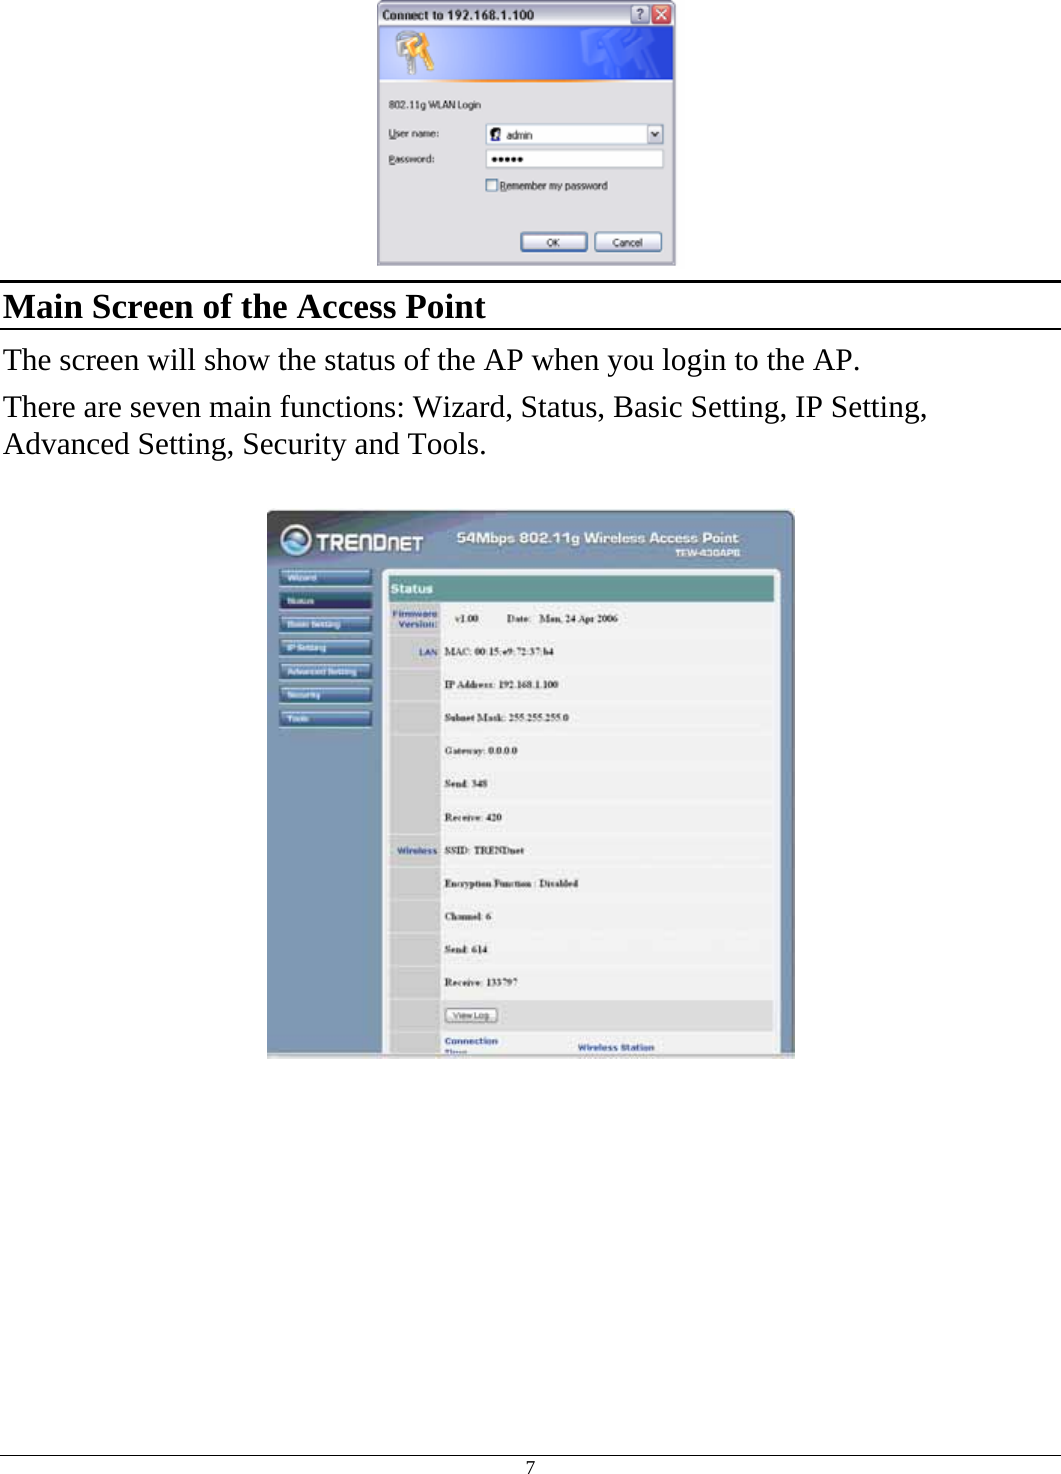  7  Main Screen of the Access Point The screen will show the status of the AP when you login to the AP. There are seven main functions: Wizard, Status, Basic Setting, IP Setting, Advanced Setting, Security and Tools.    